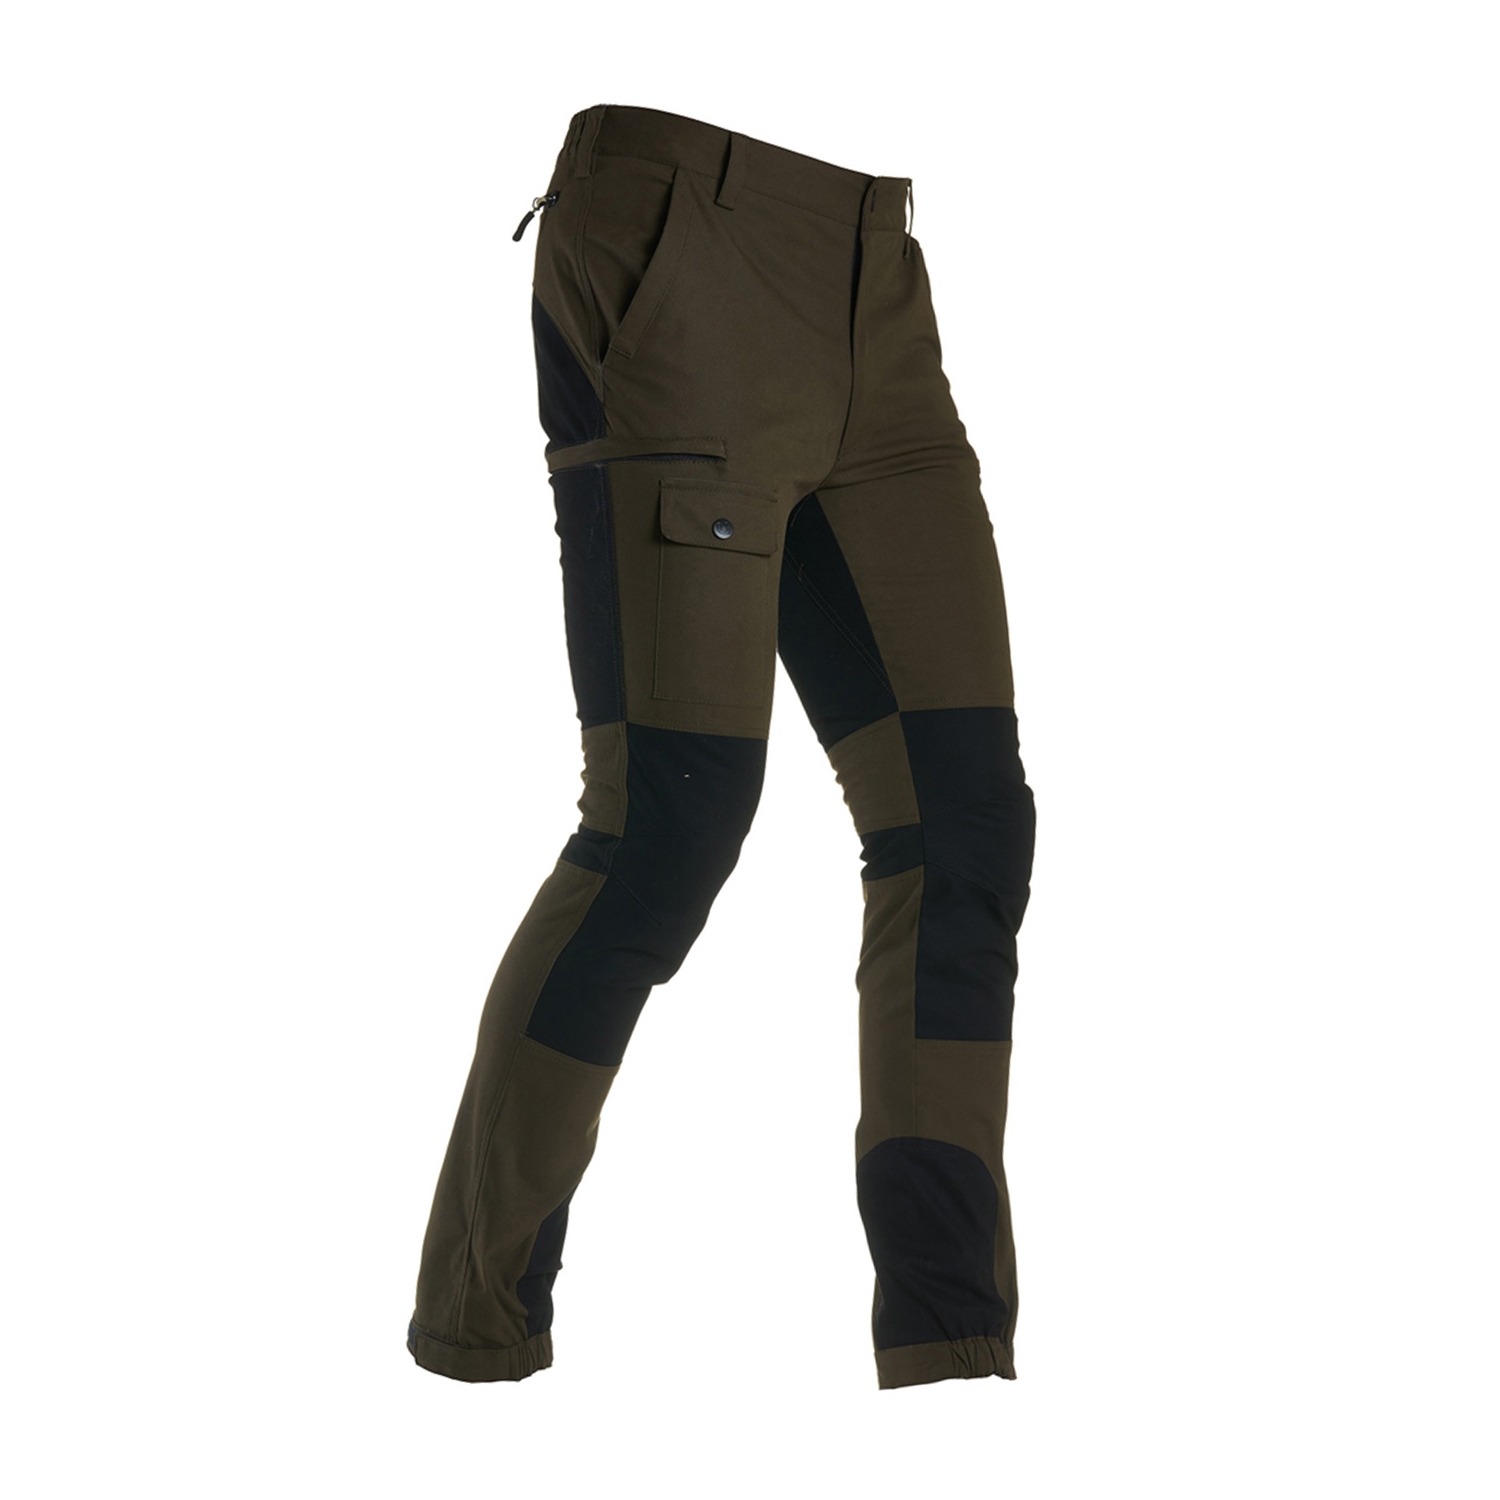 UNIVERS LEGEND hunting stretch trousers 92114 302